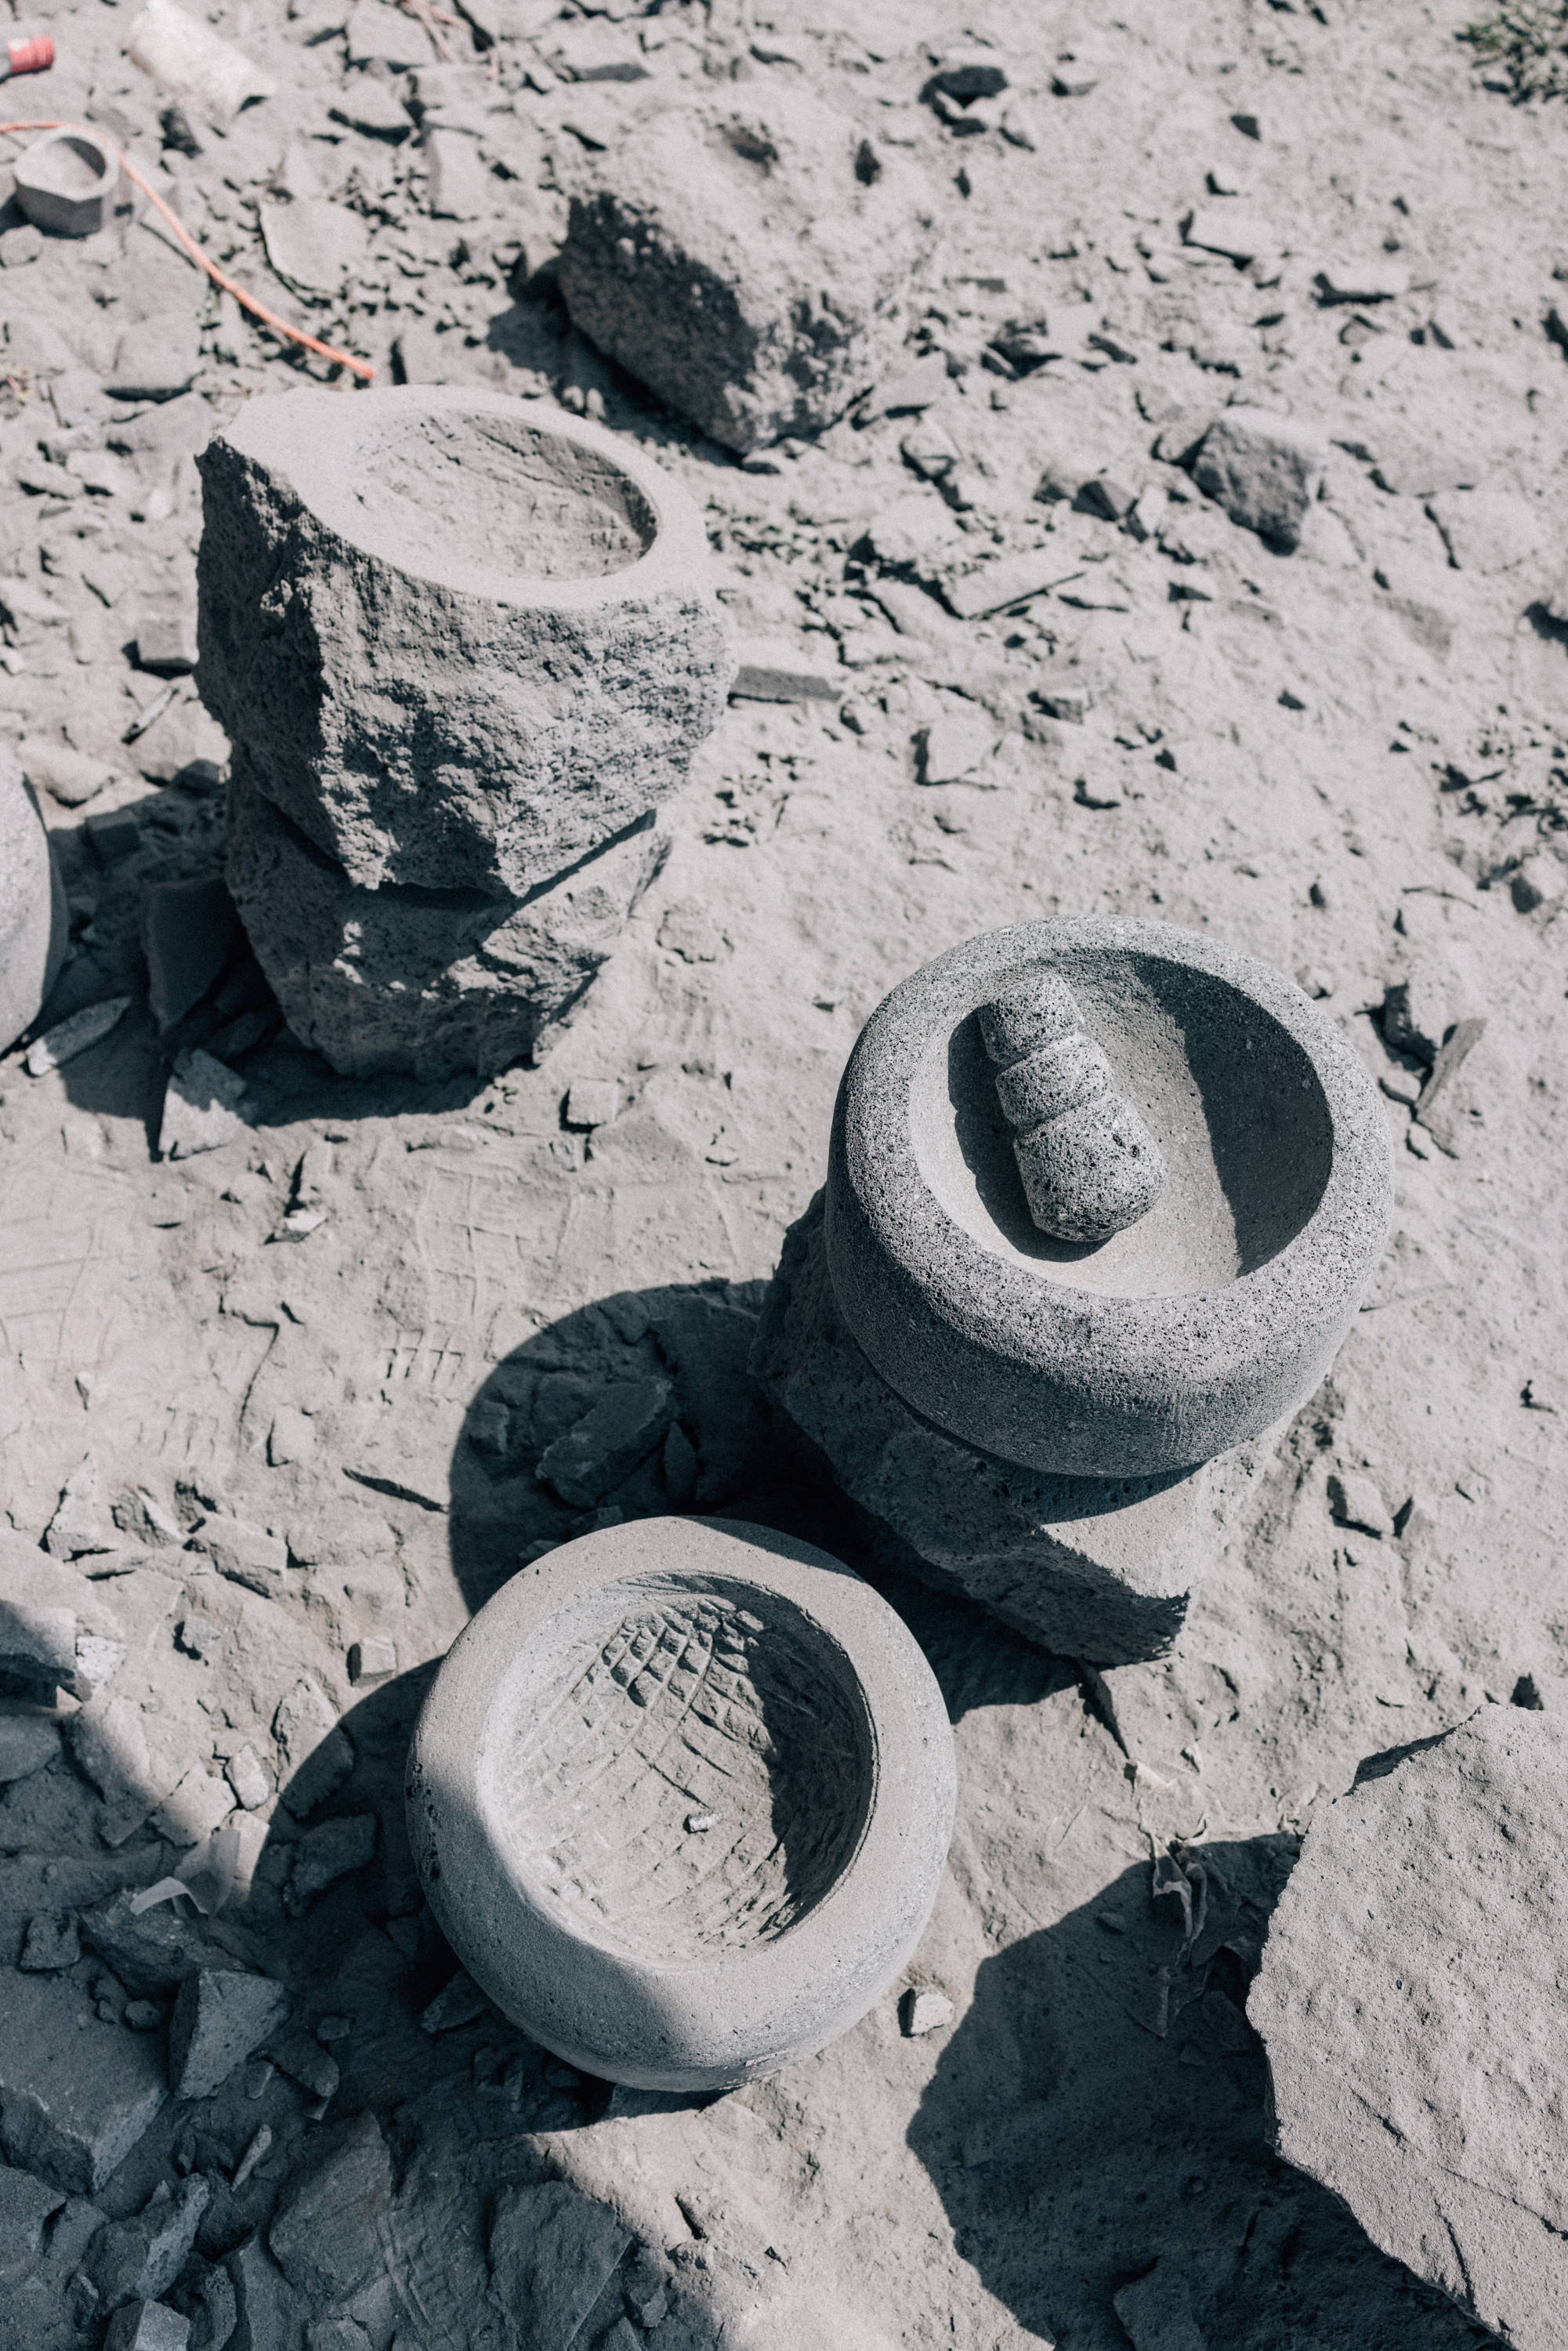 Mexican Cooking Utensils: Metate and Molcajete